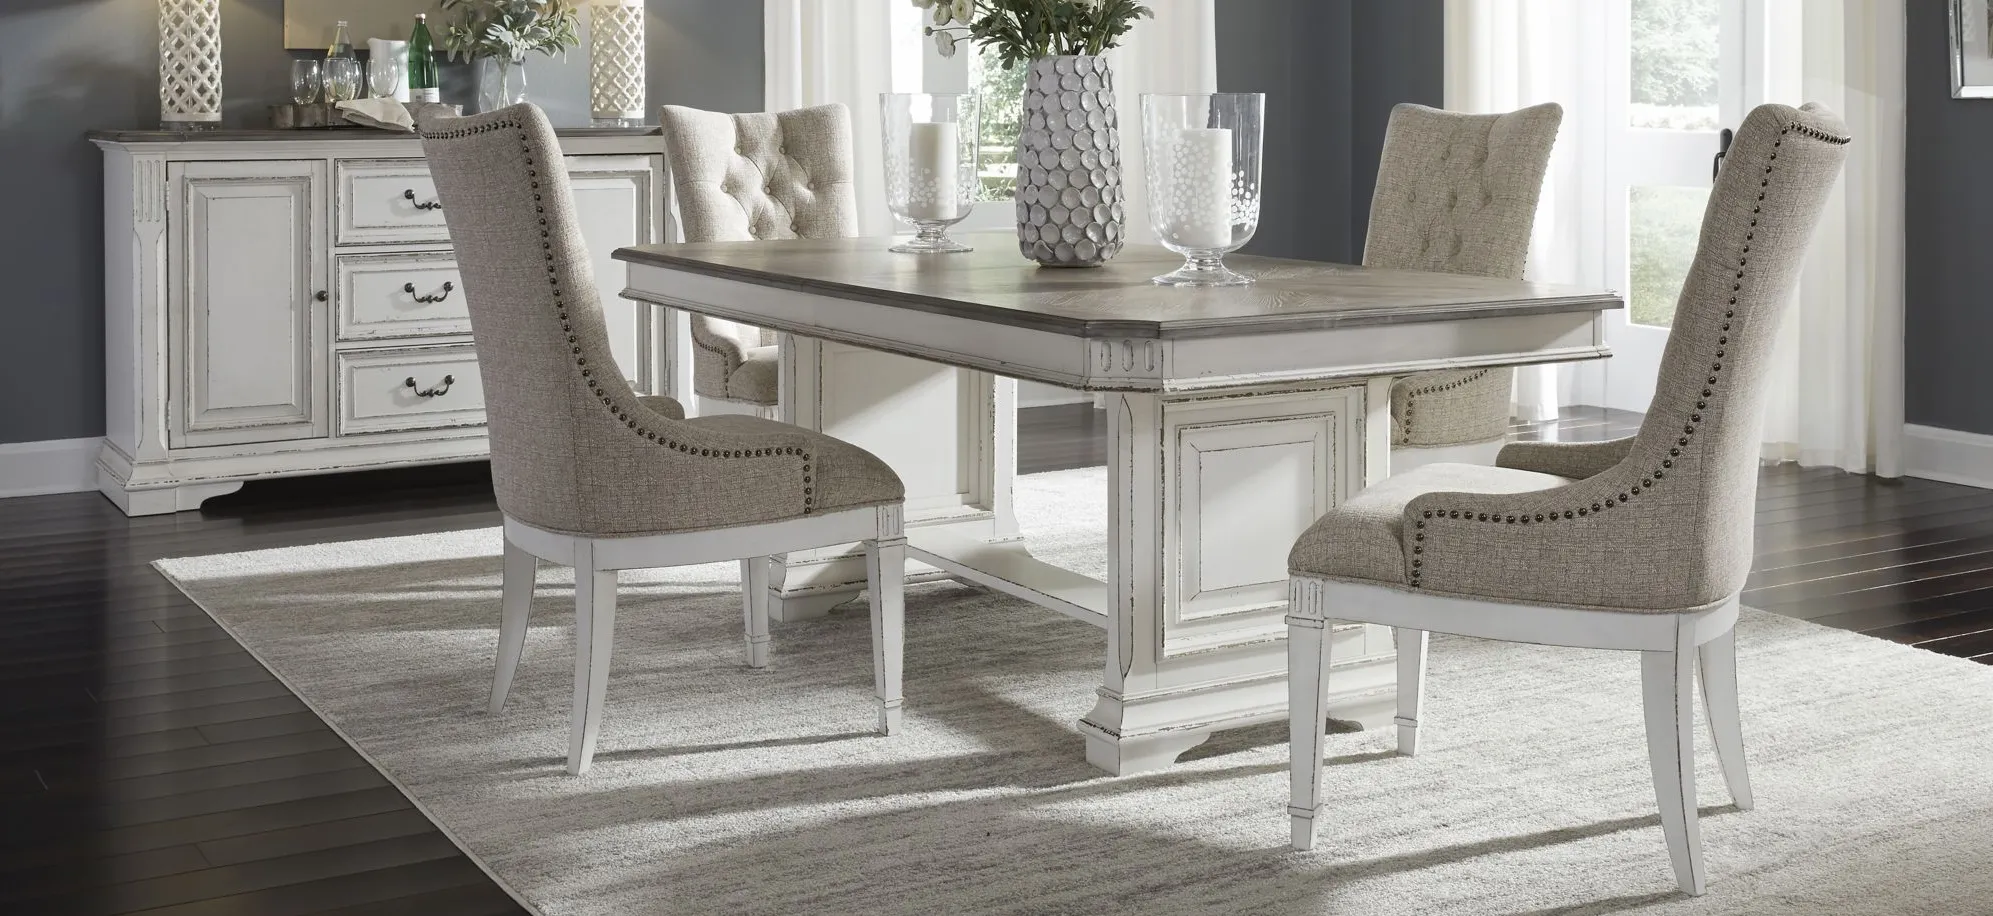 Birmingham 5-pc. Dining Set in White by Liberty Furniture